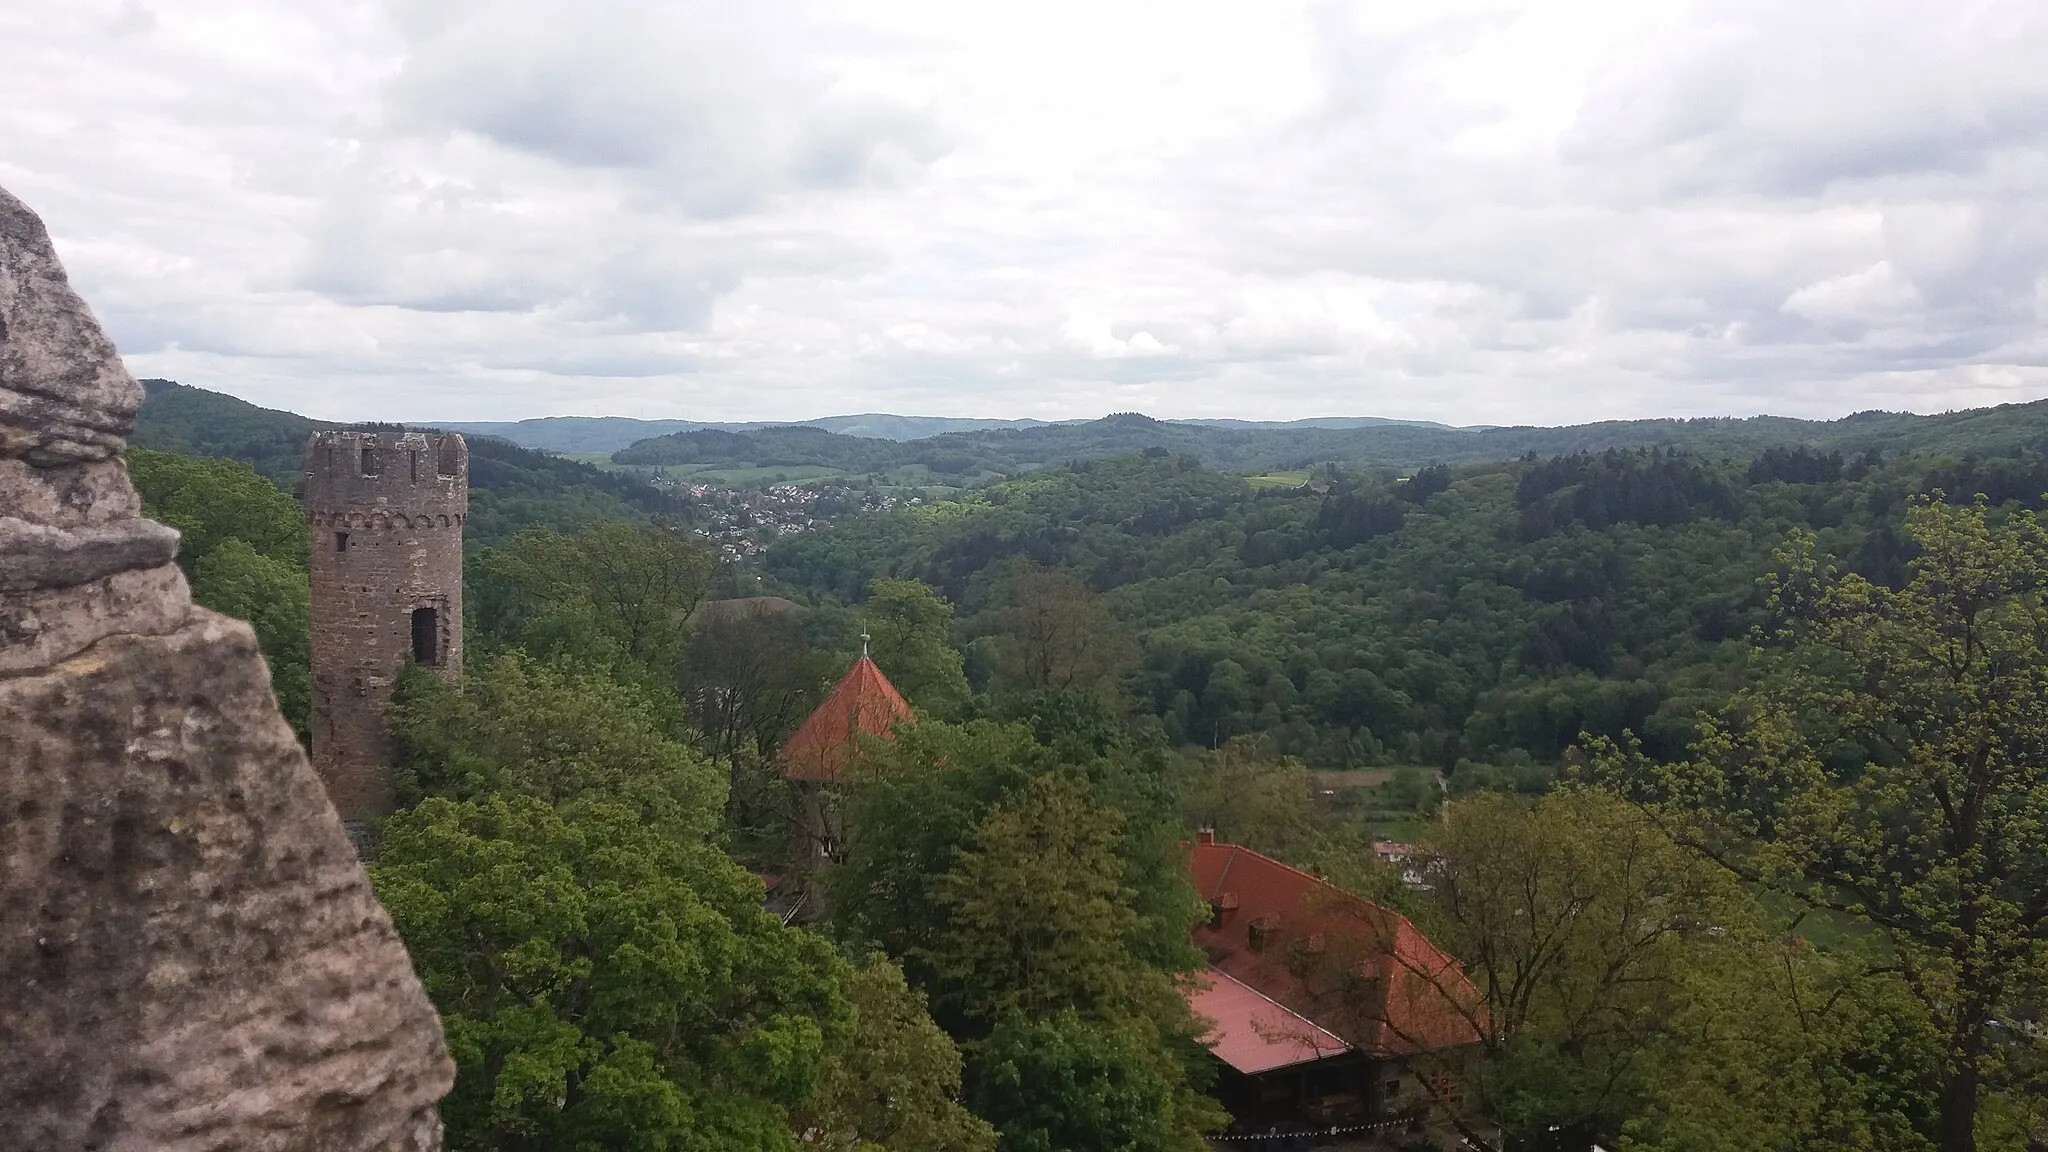 Photo showing: View from the tower of the Starkenburg in the Odenwald forest